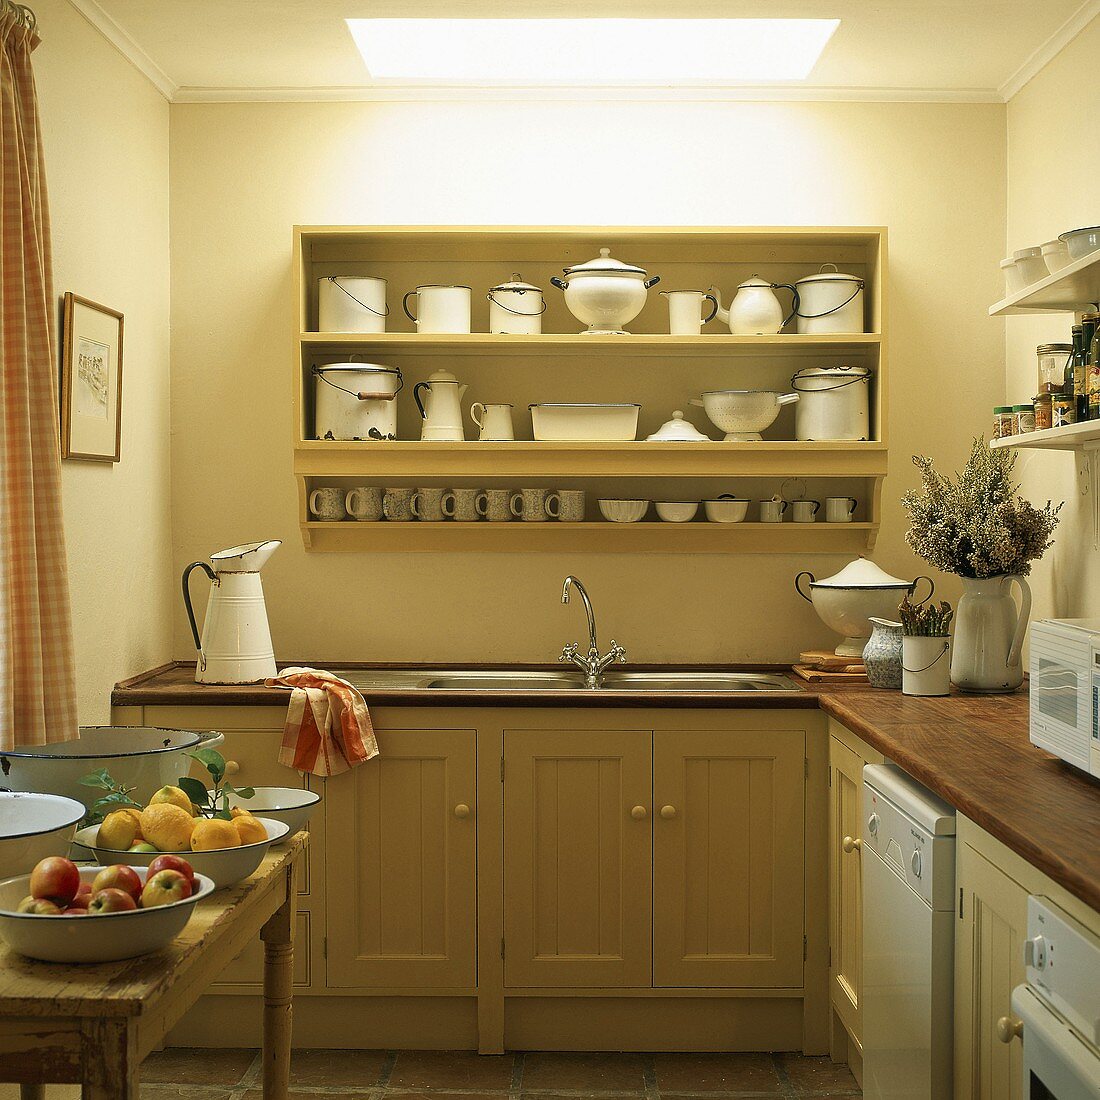 Simple kitchen with wooden cabinets and collection of enamel crockery on wall-mounted shelves